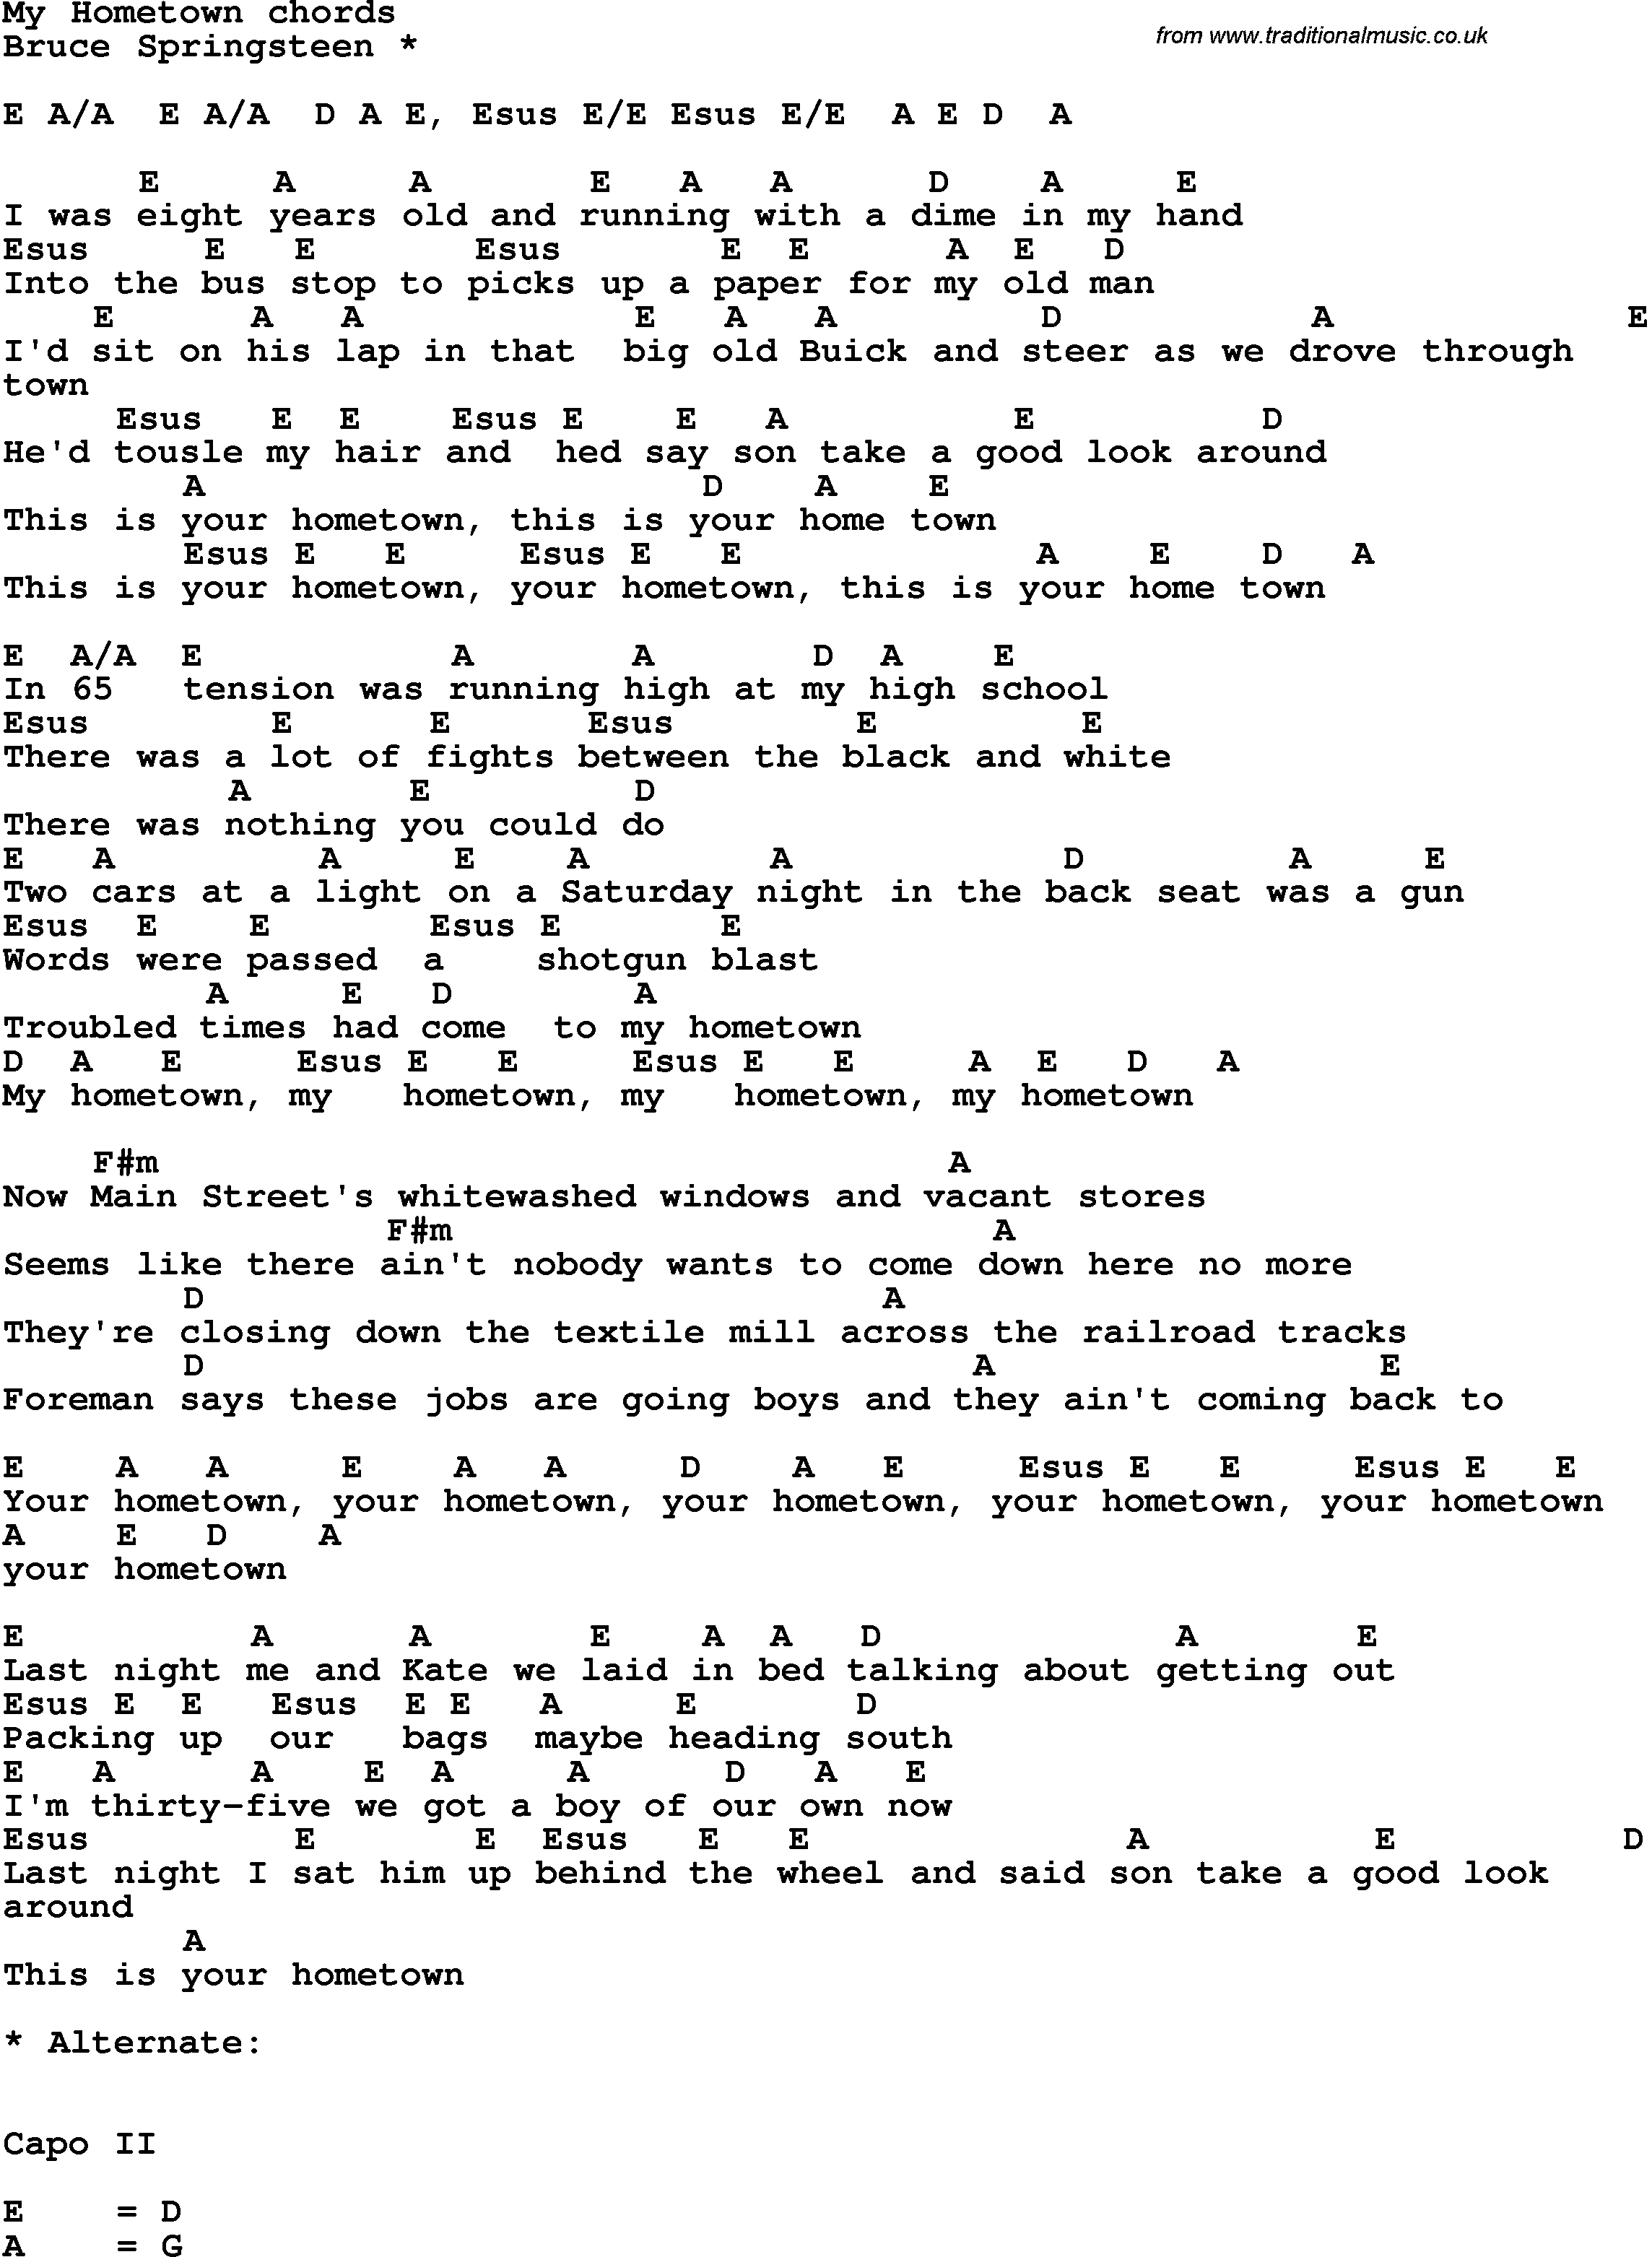 Song Lyrics with guitar chords for My Hometown